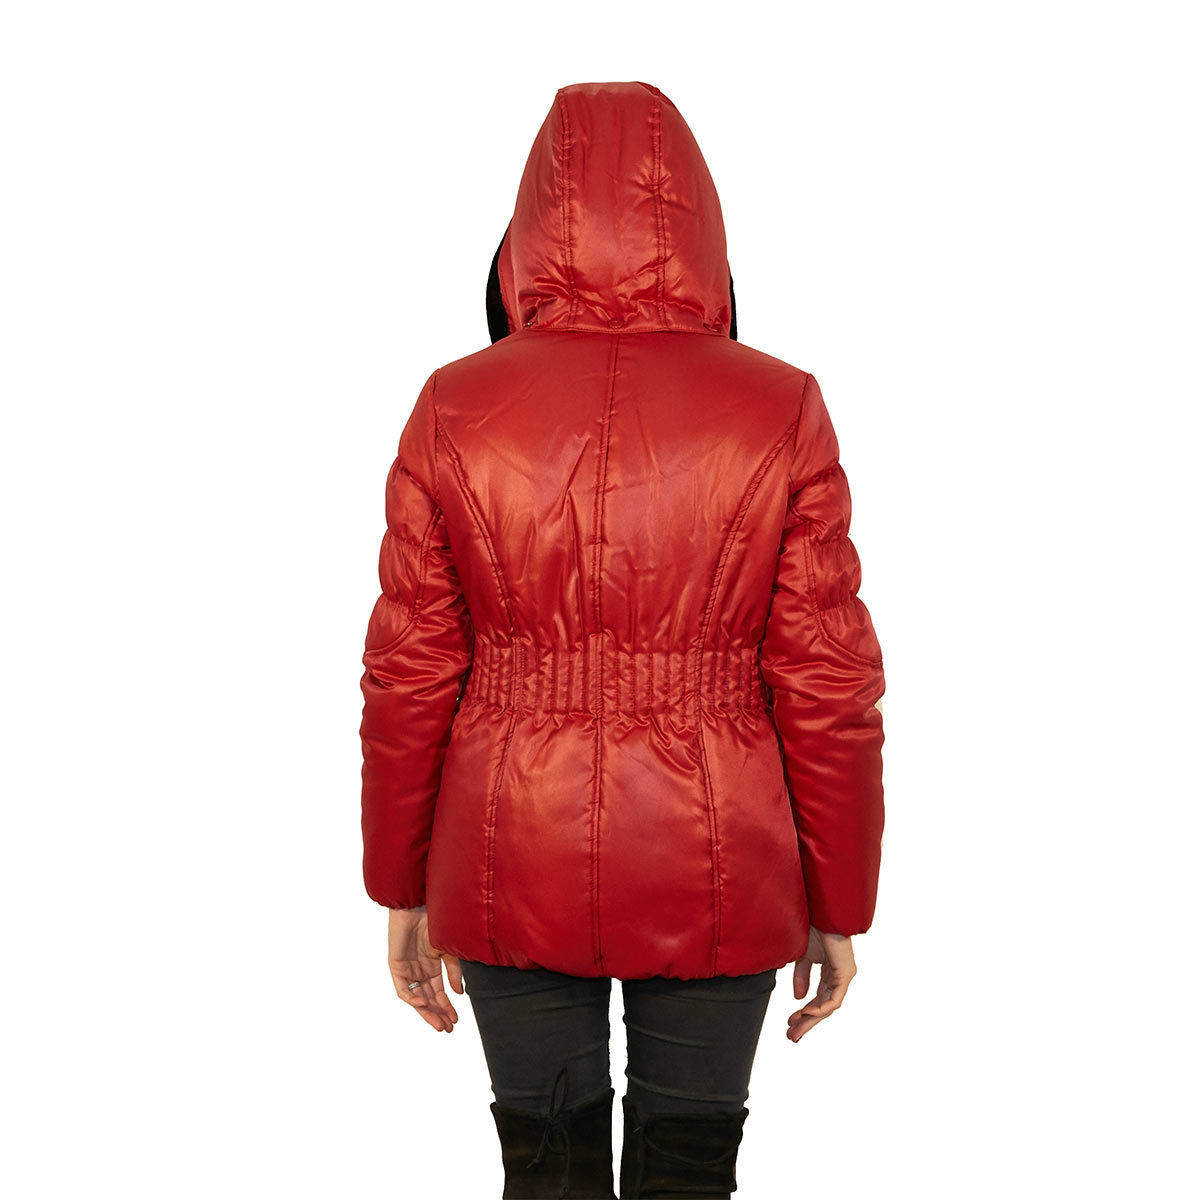 David Barry Women's Padded Jacket Available in Red and 6 Sizes